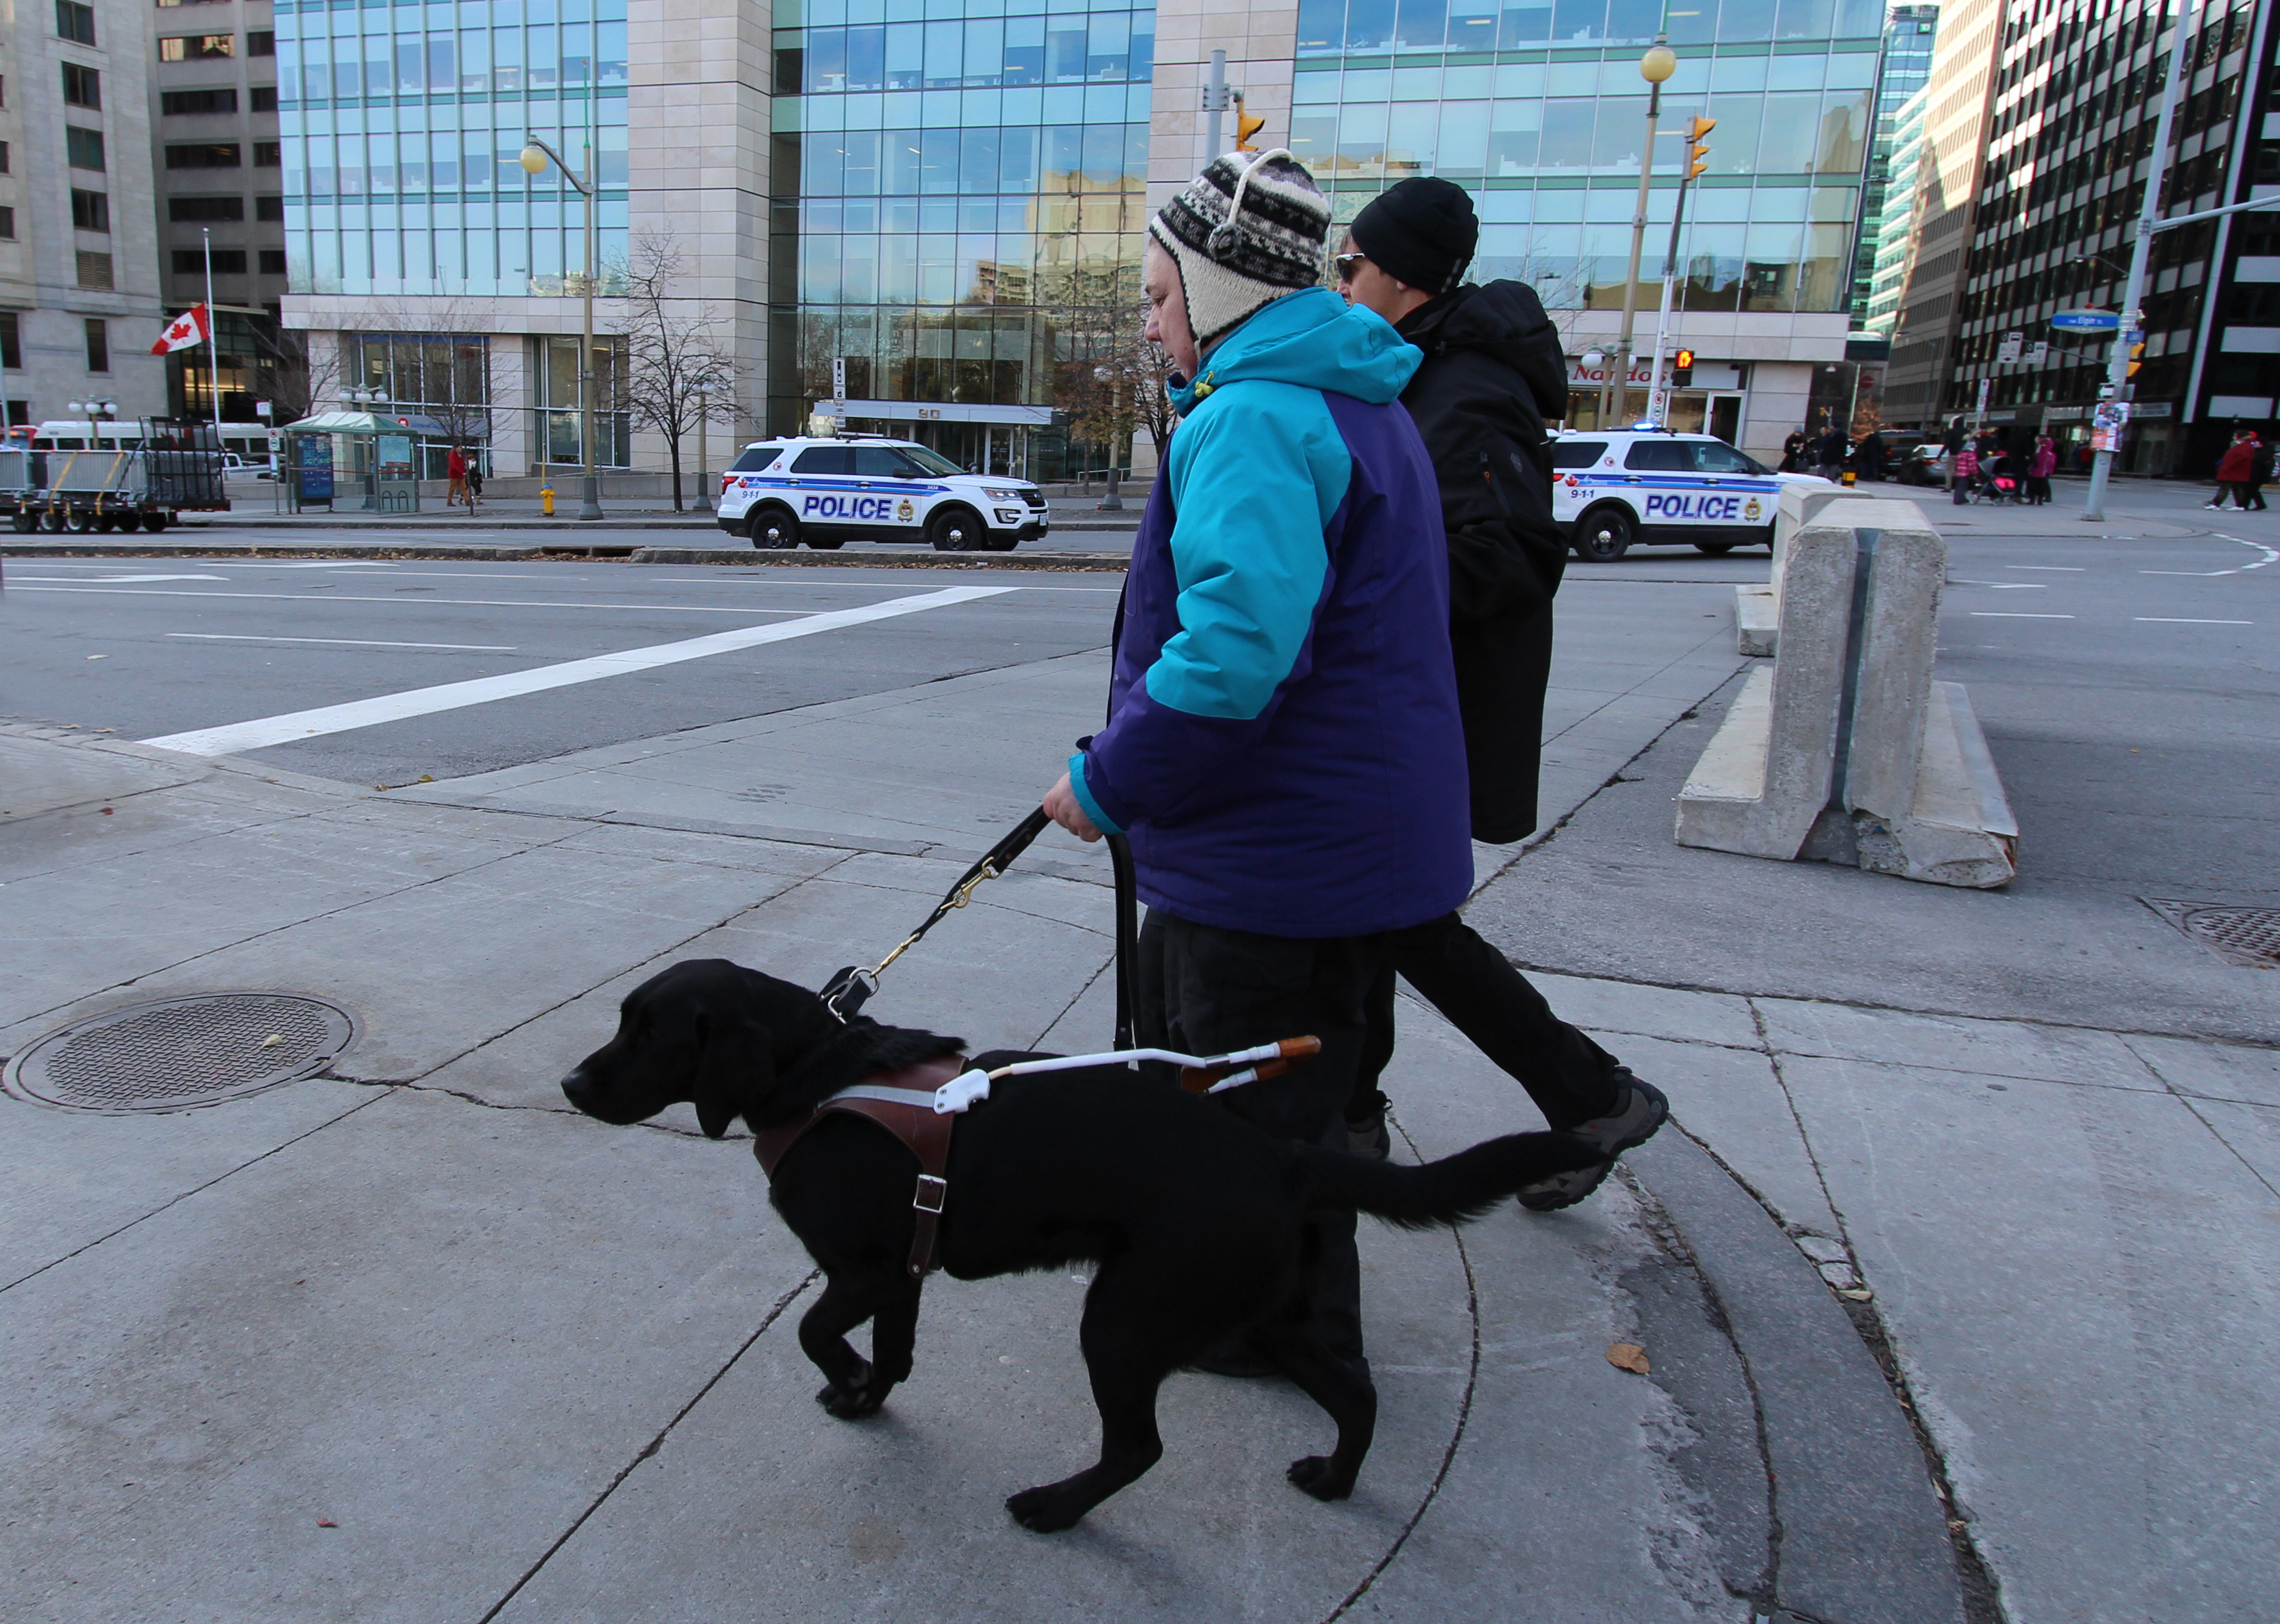 Sandy and her guide dog Keller, walking along a sidewalk in a busy downtown area during a cold day.